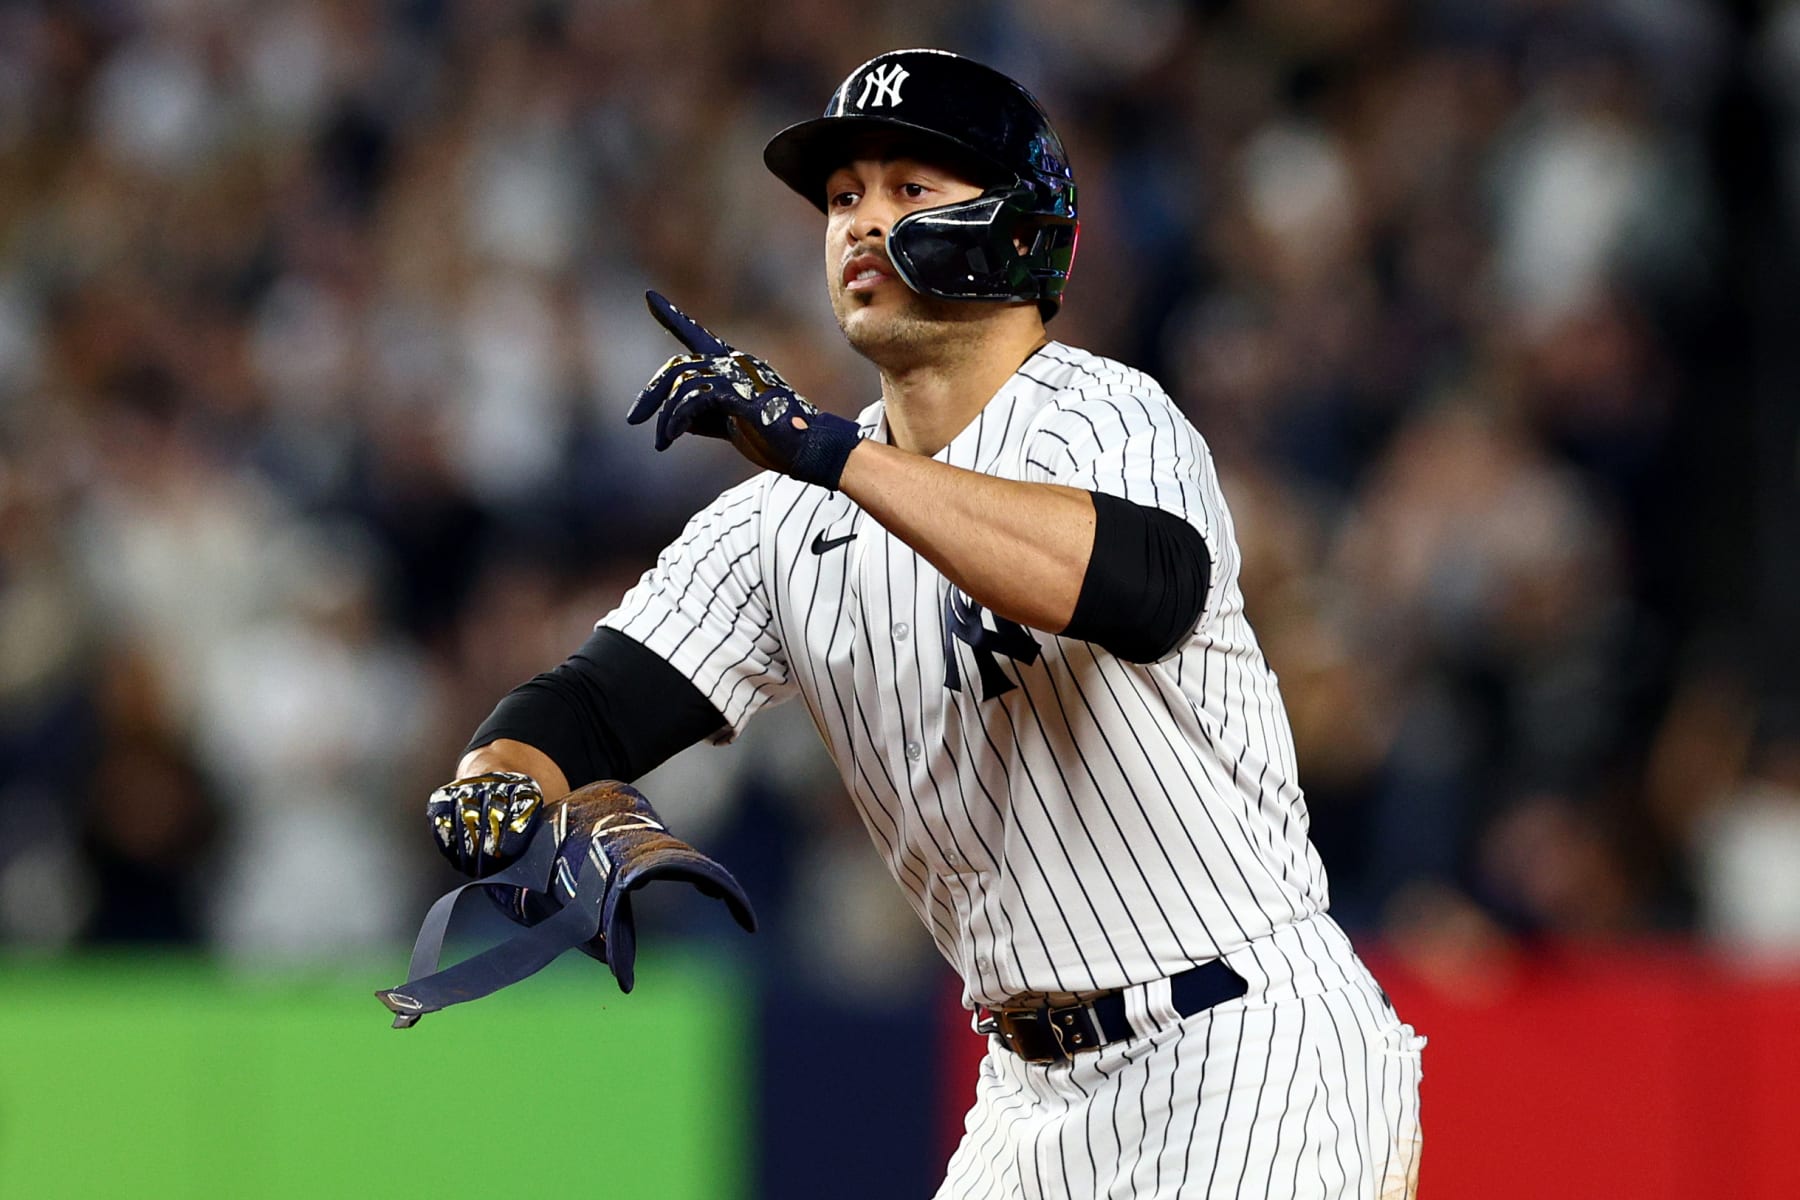 Every Yankees decision will have a Giancarlo Stanton caveat